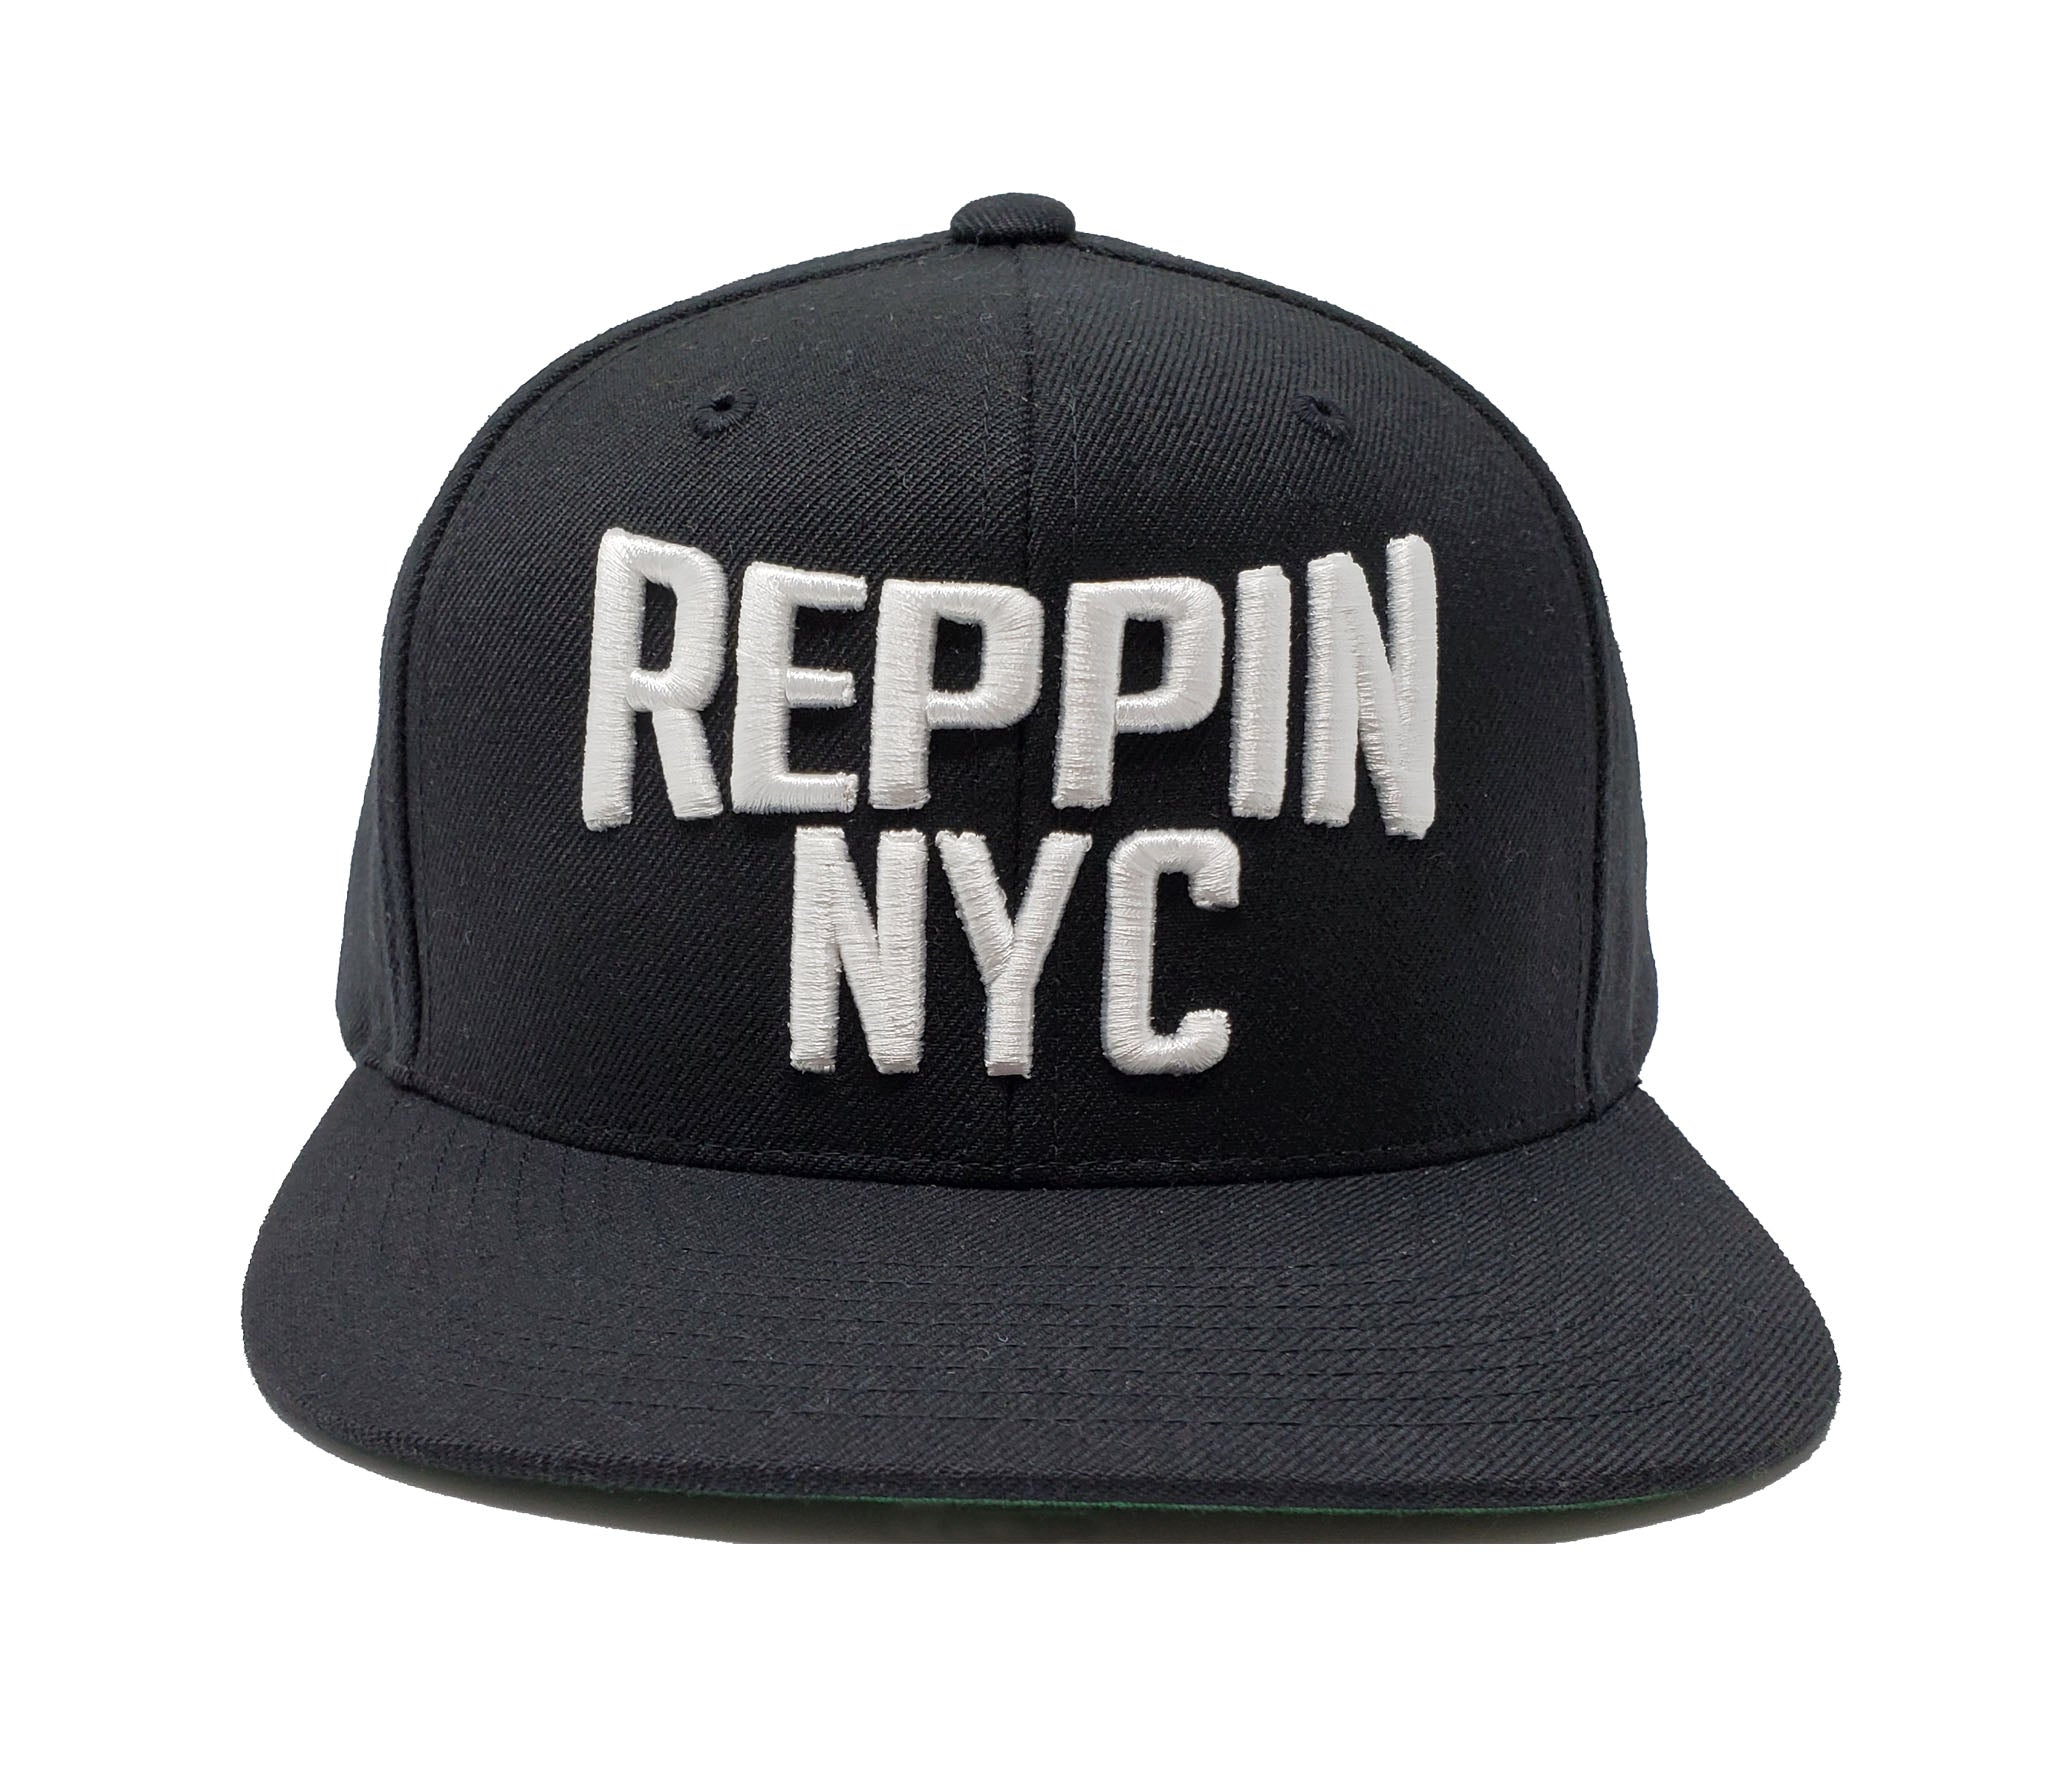 Reppin NYC Black and White Snapback